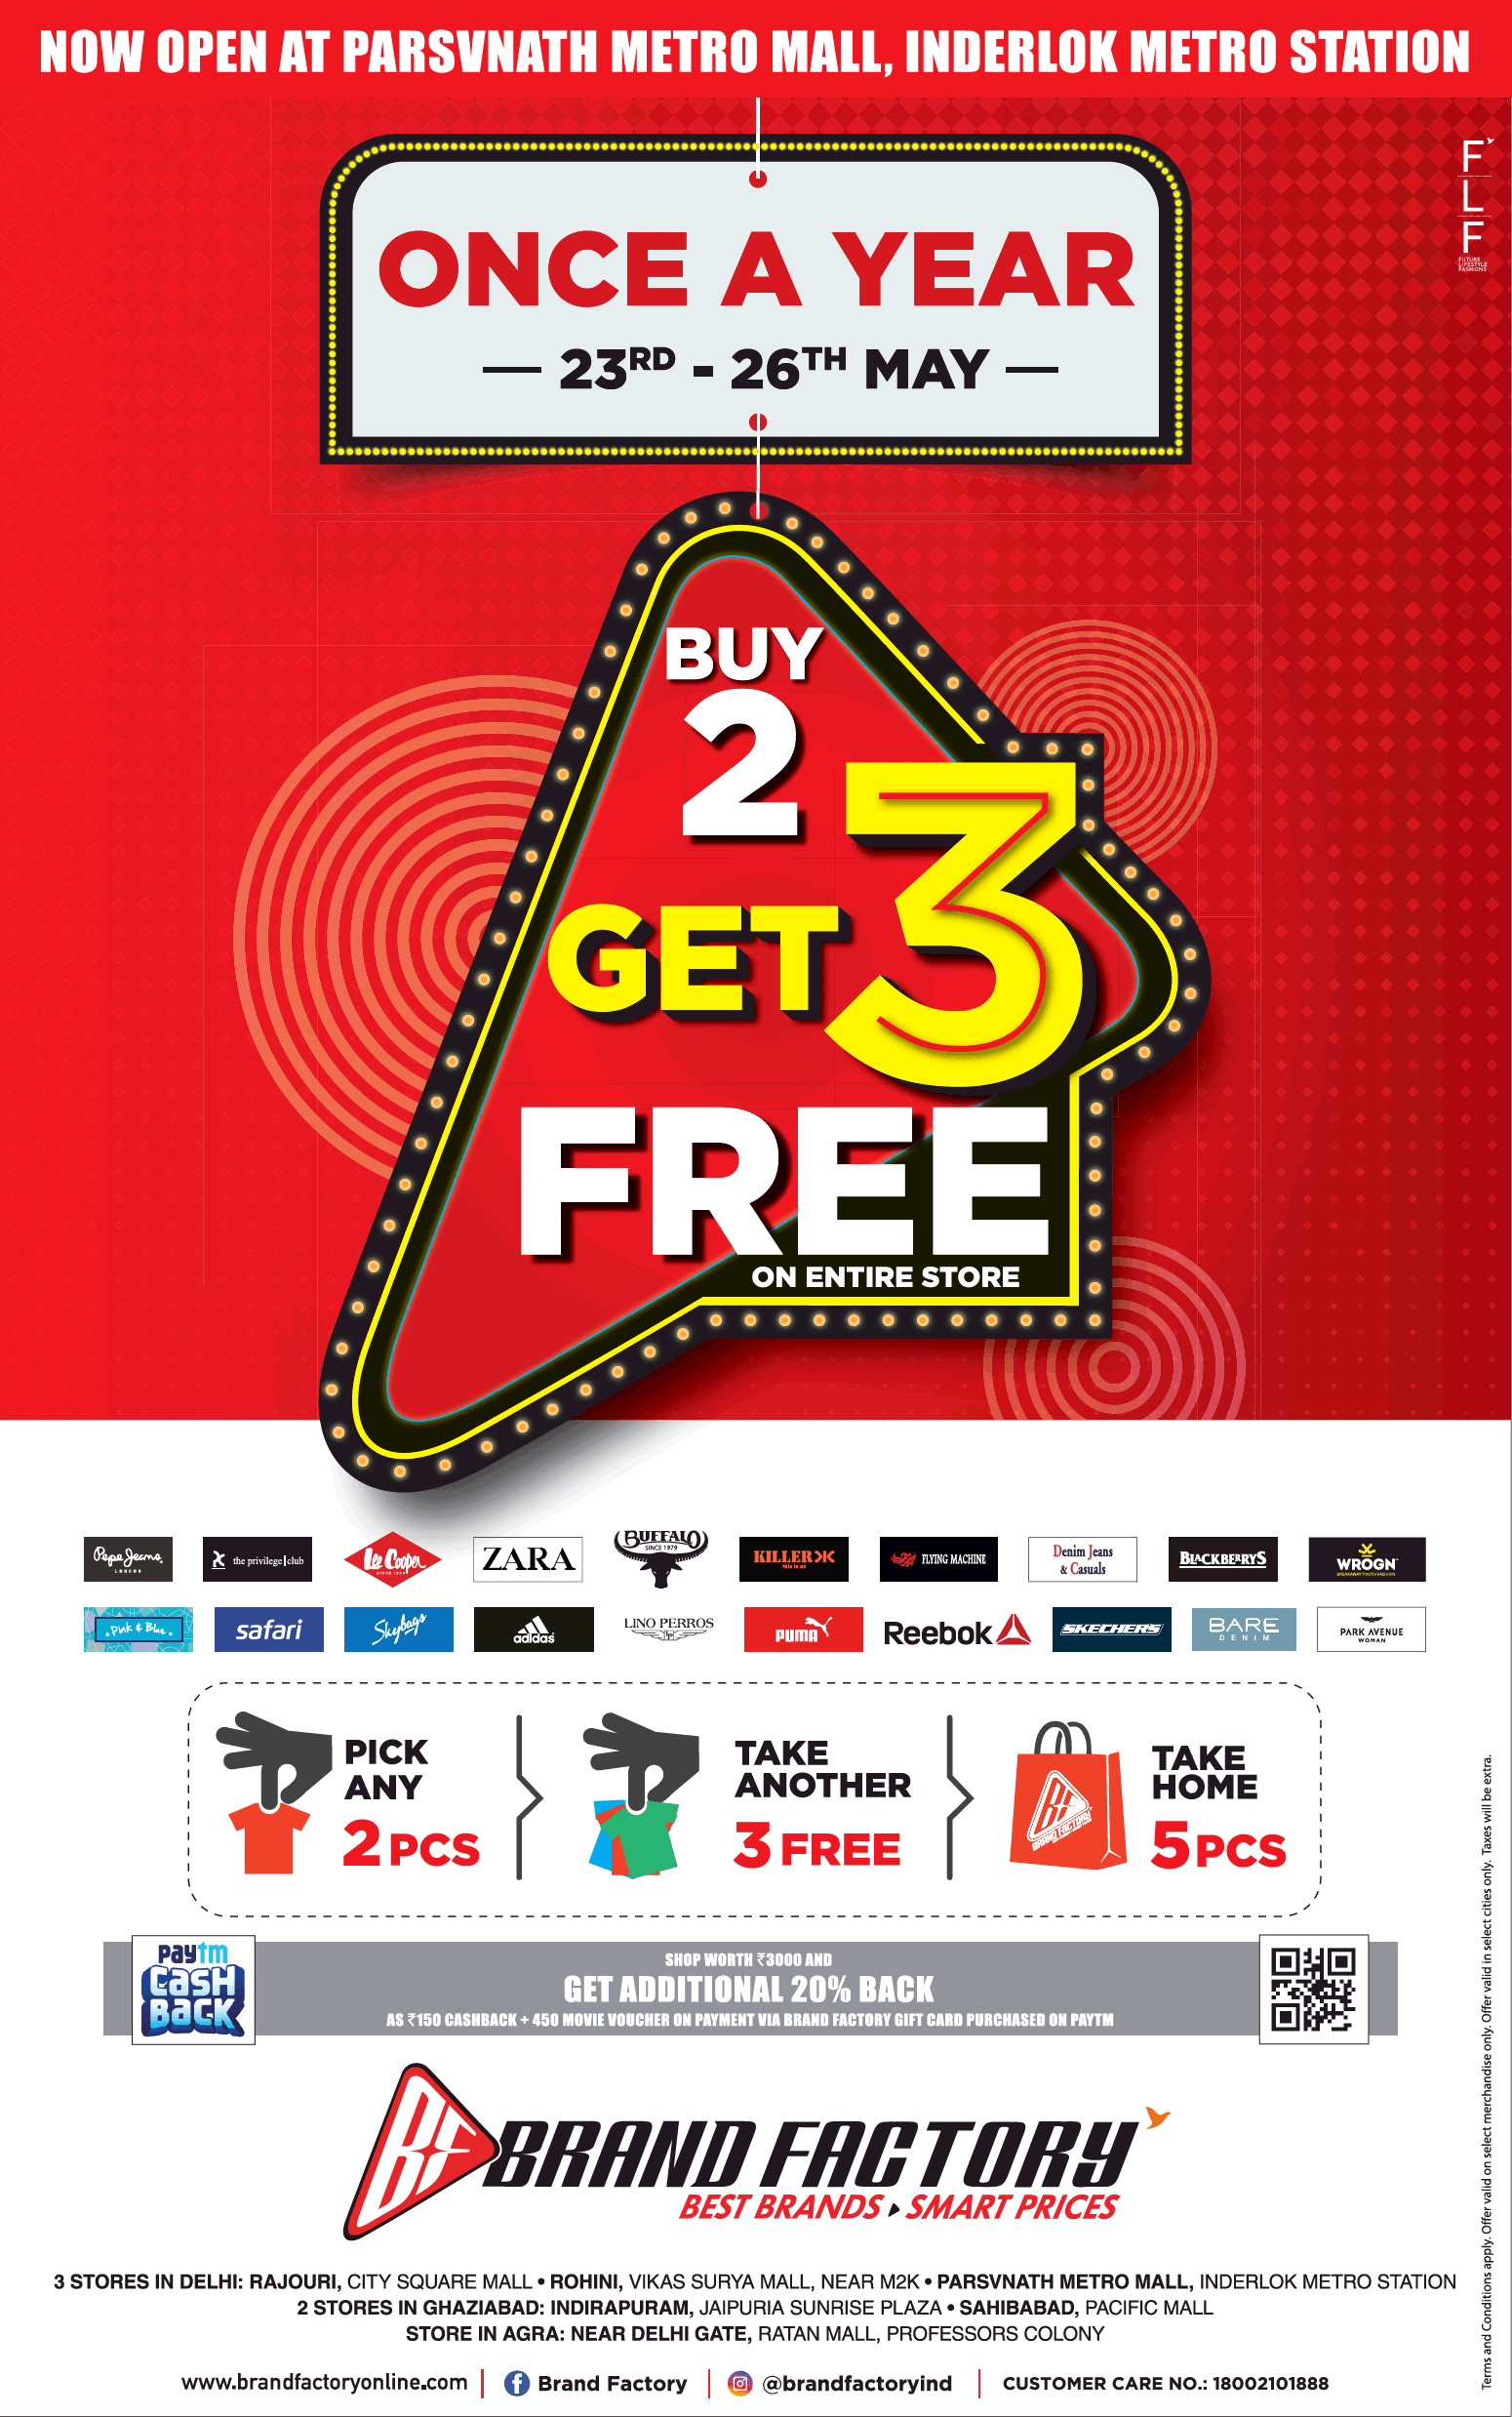 brand-factory-once-a-year-23rd-to-26th-may-buy-2-get-3-free-ad-times-of-india-delhi-23-05-2019.png